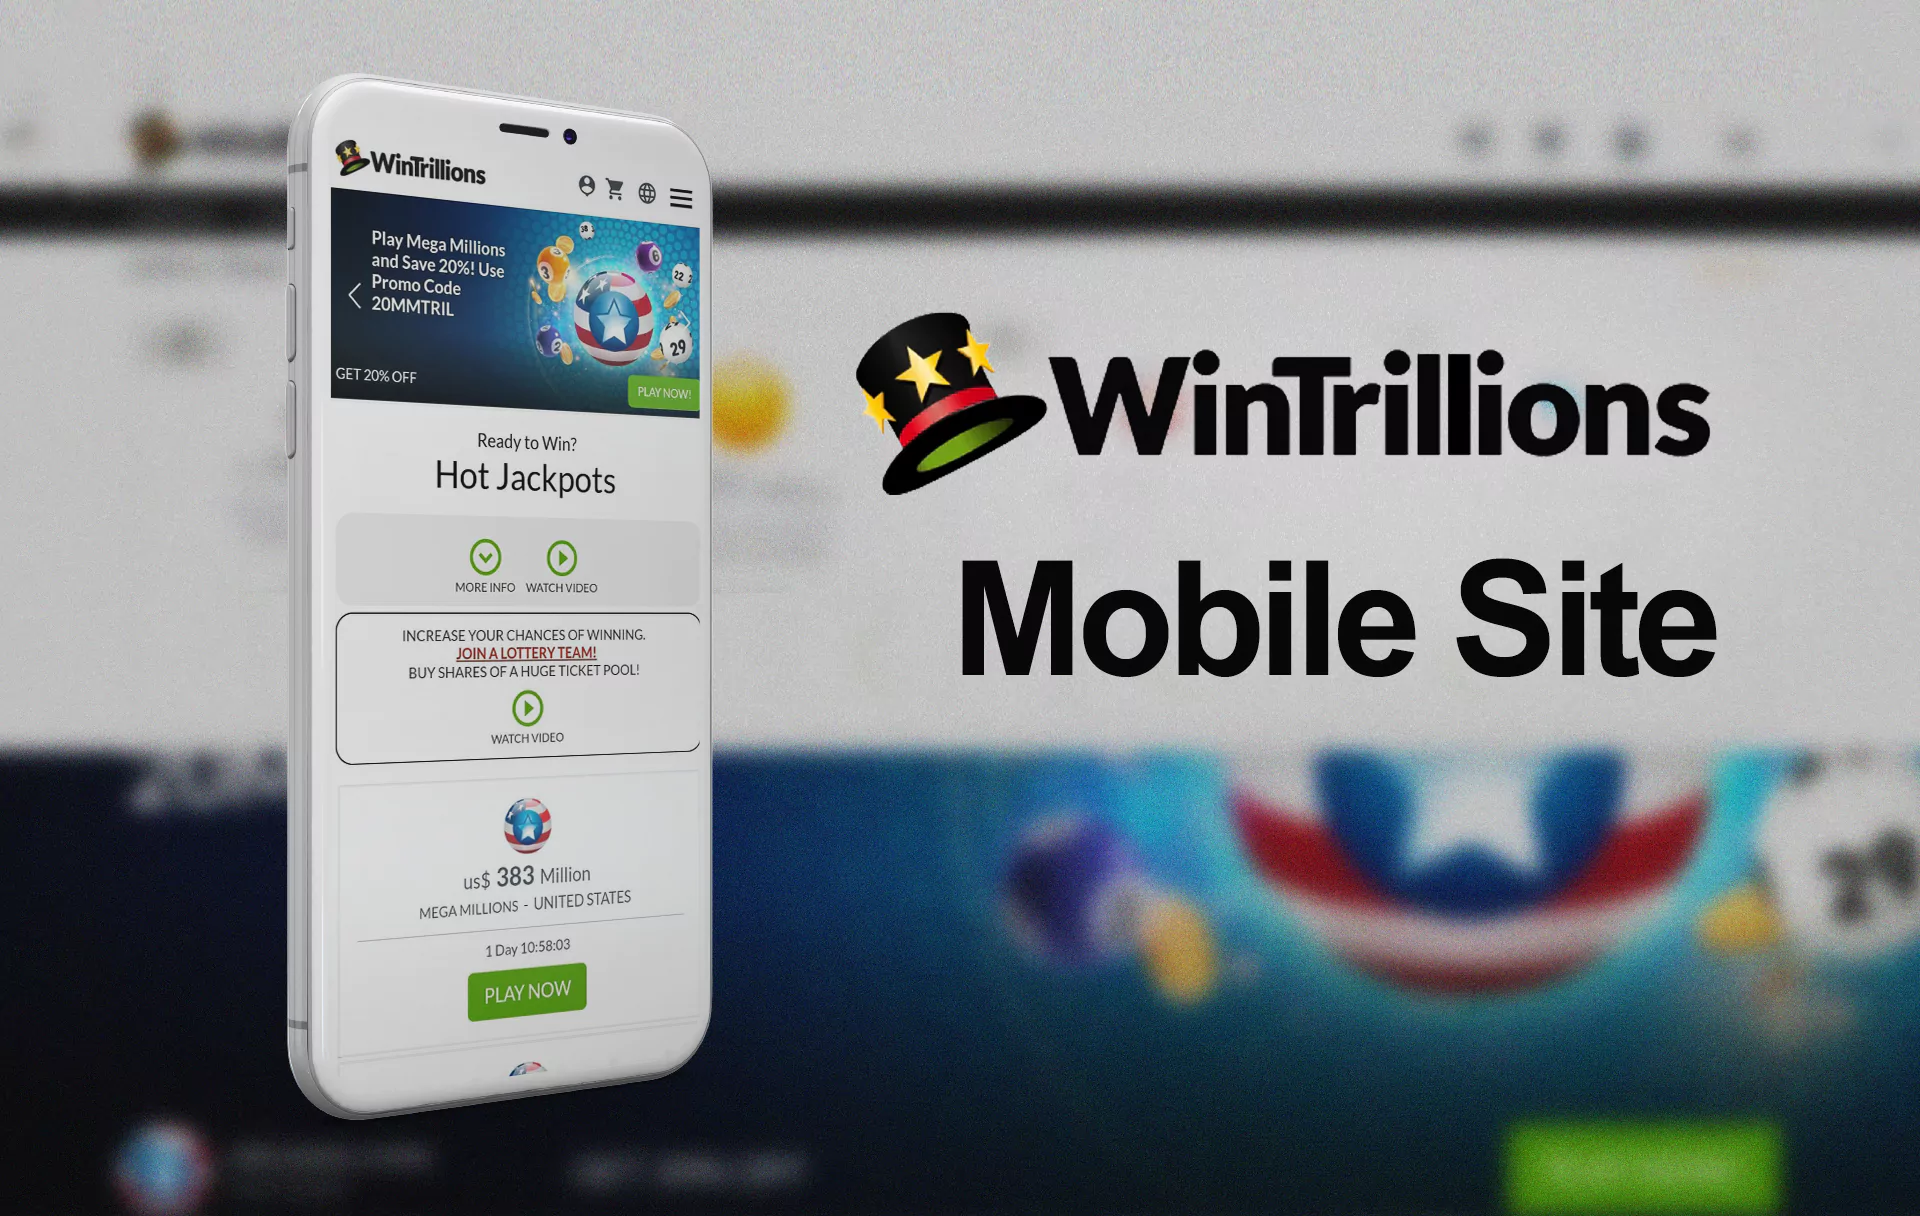 If you are a smartphone user you can visit the Wintrillions in a browser.